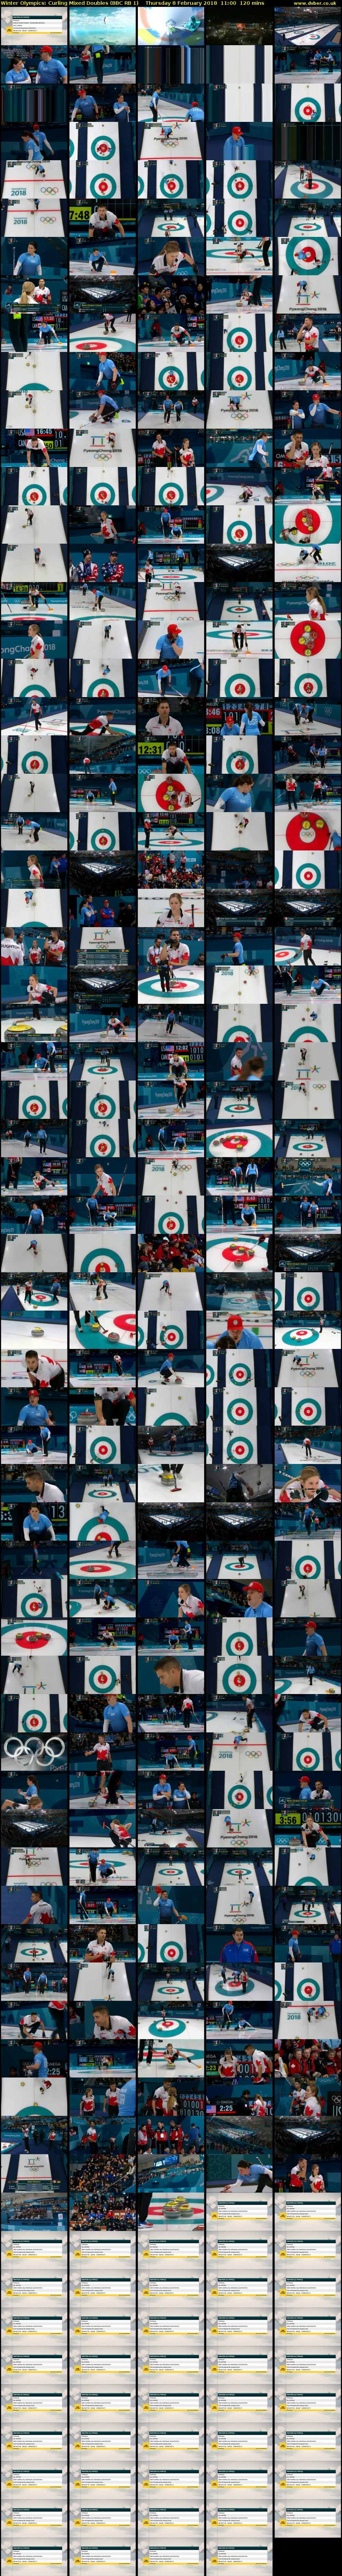 Winter Olympics: Curling Mixed Doubles (BBC RB 1) Thursday 8 February 2018 11:00 - 13:00